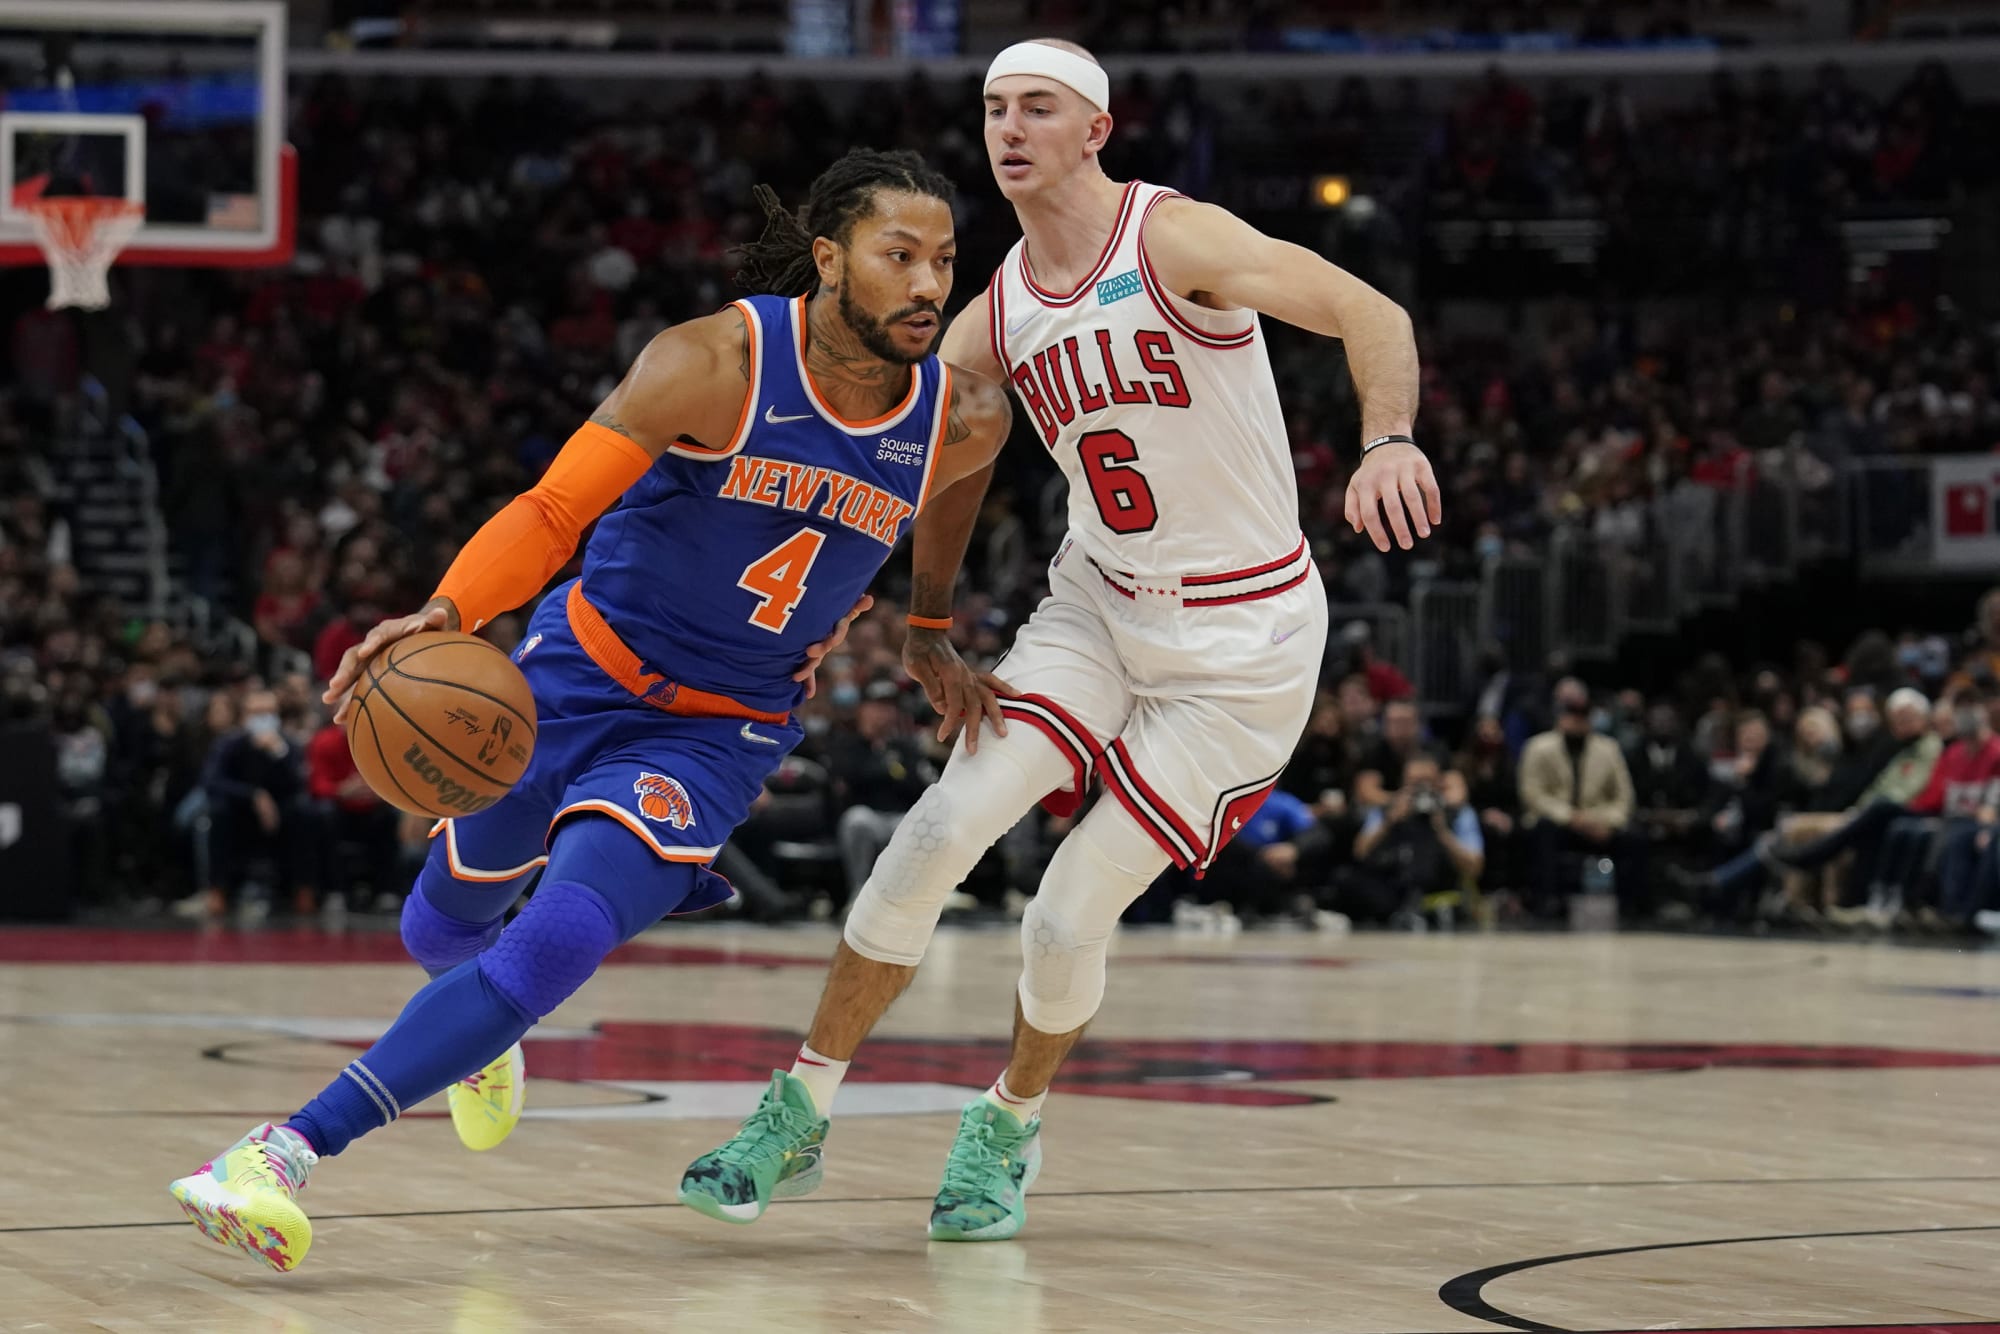 Will Derrick Rose ever return to play for the Chicago Bulls?